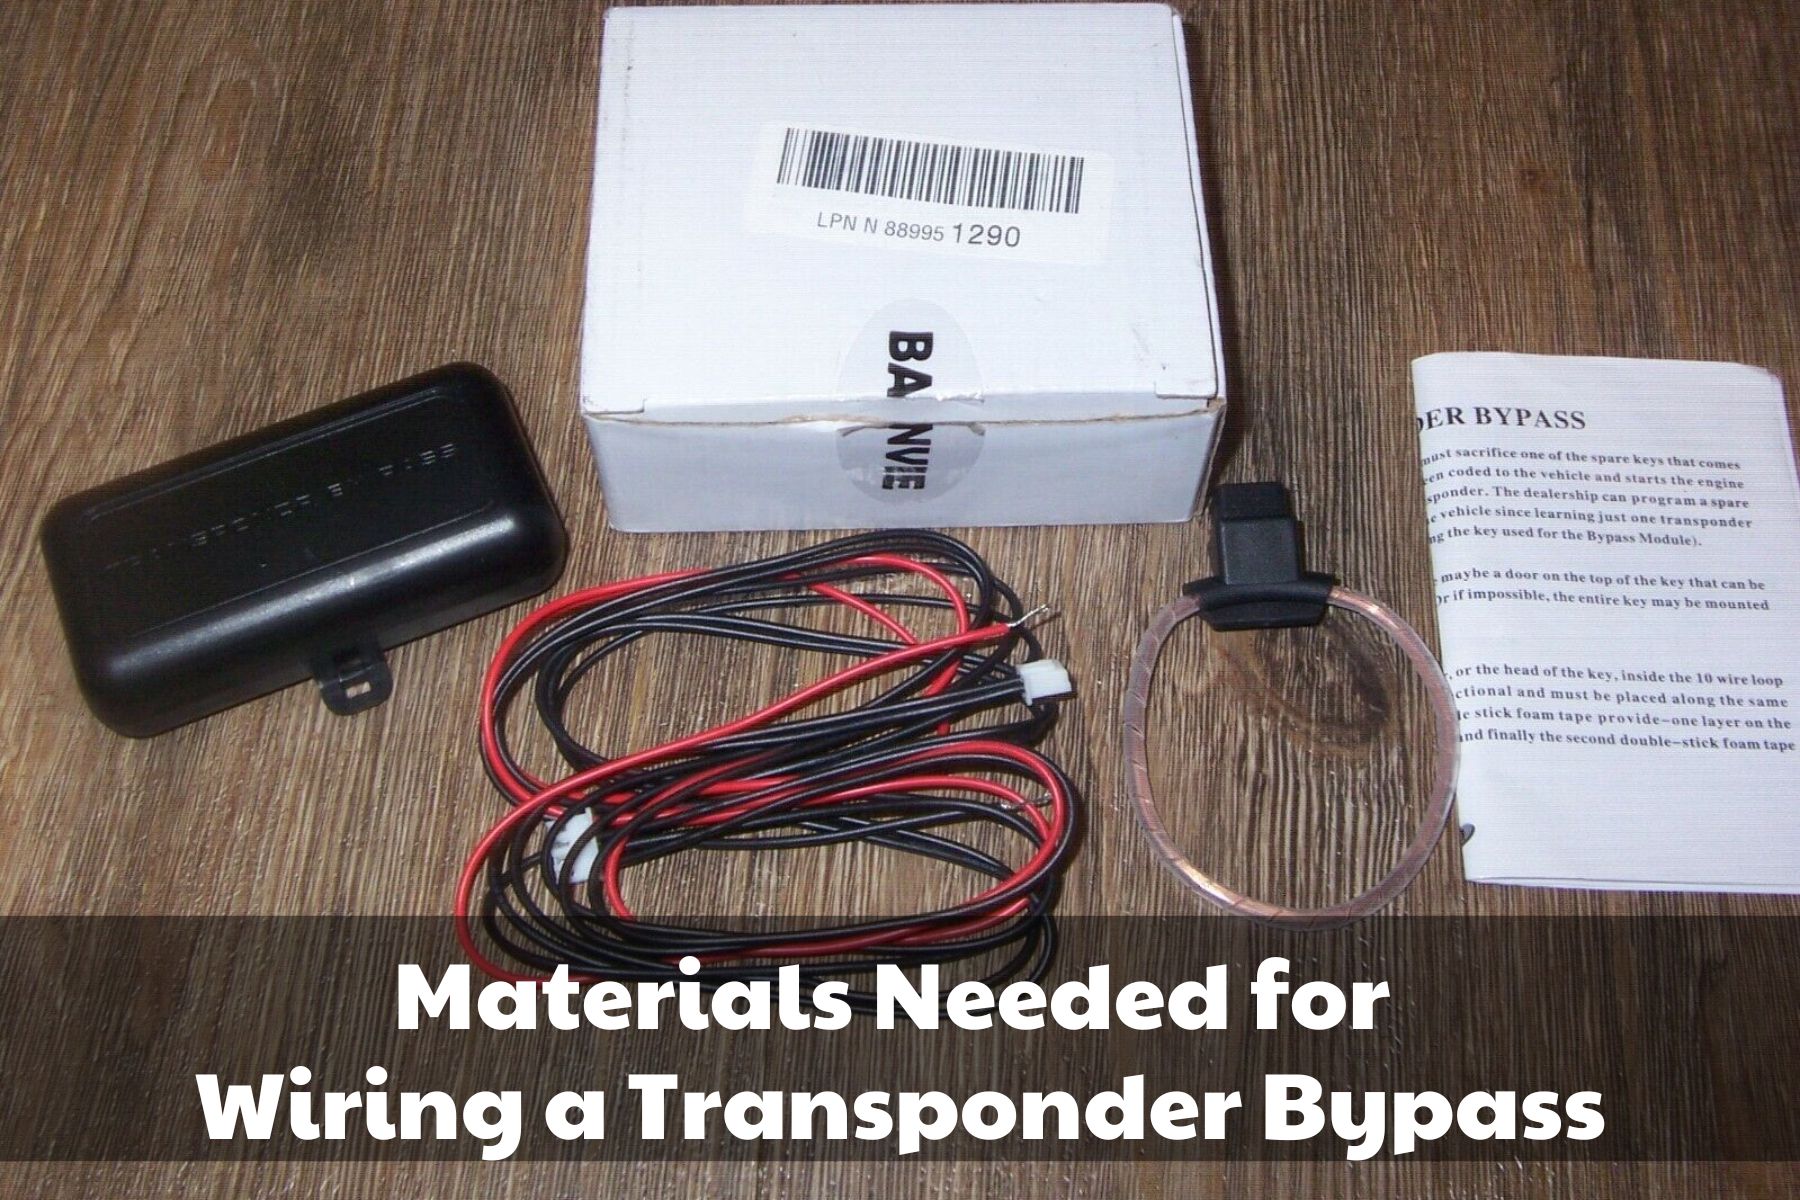 How-To-Wire-Transponder-Bypass (1)How-To-Wire-Transponder-Bypass (1)